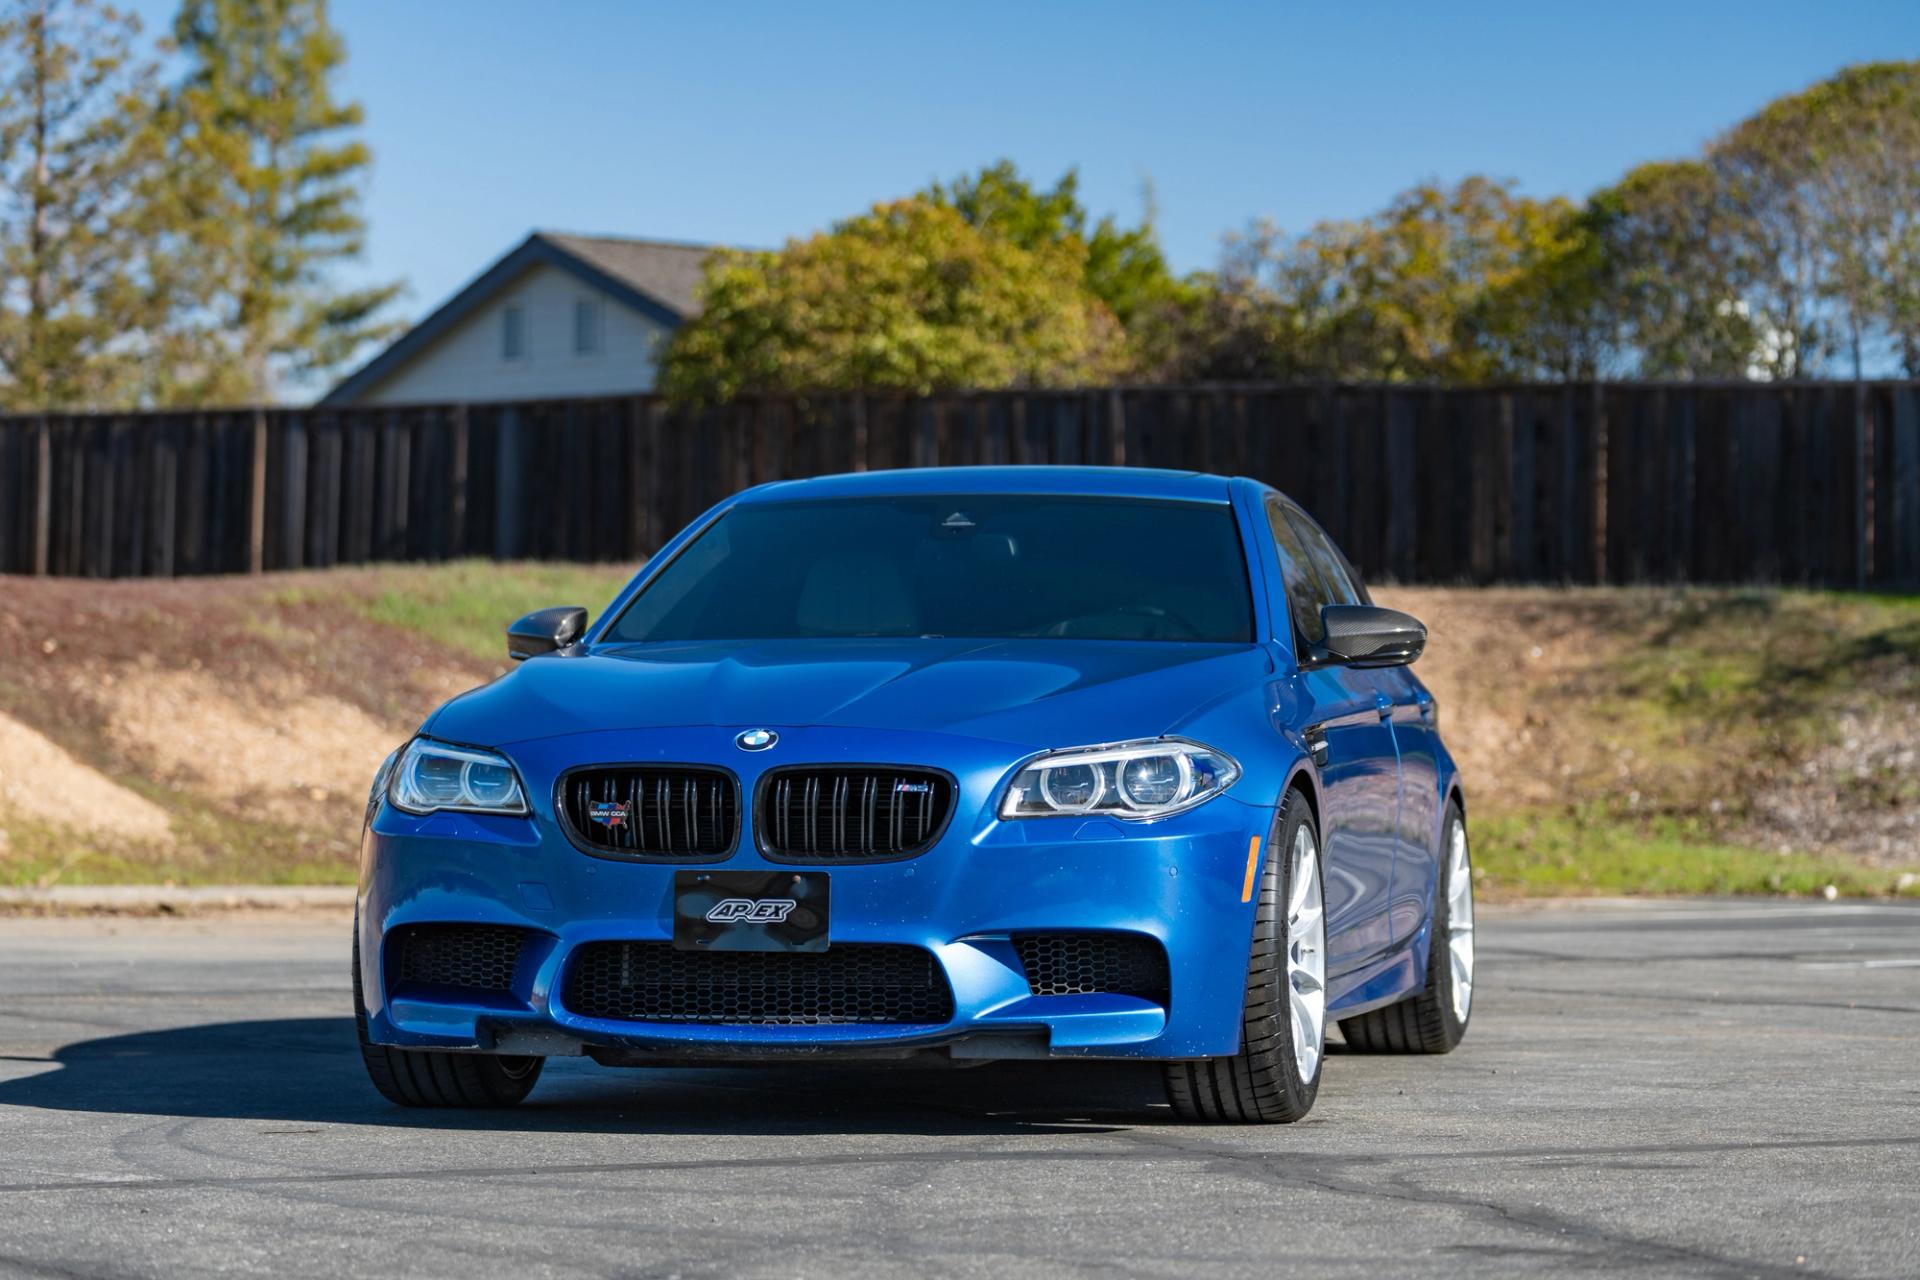 BMW F10 M5 with 19" SM-10RS in Brushed Clear